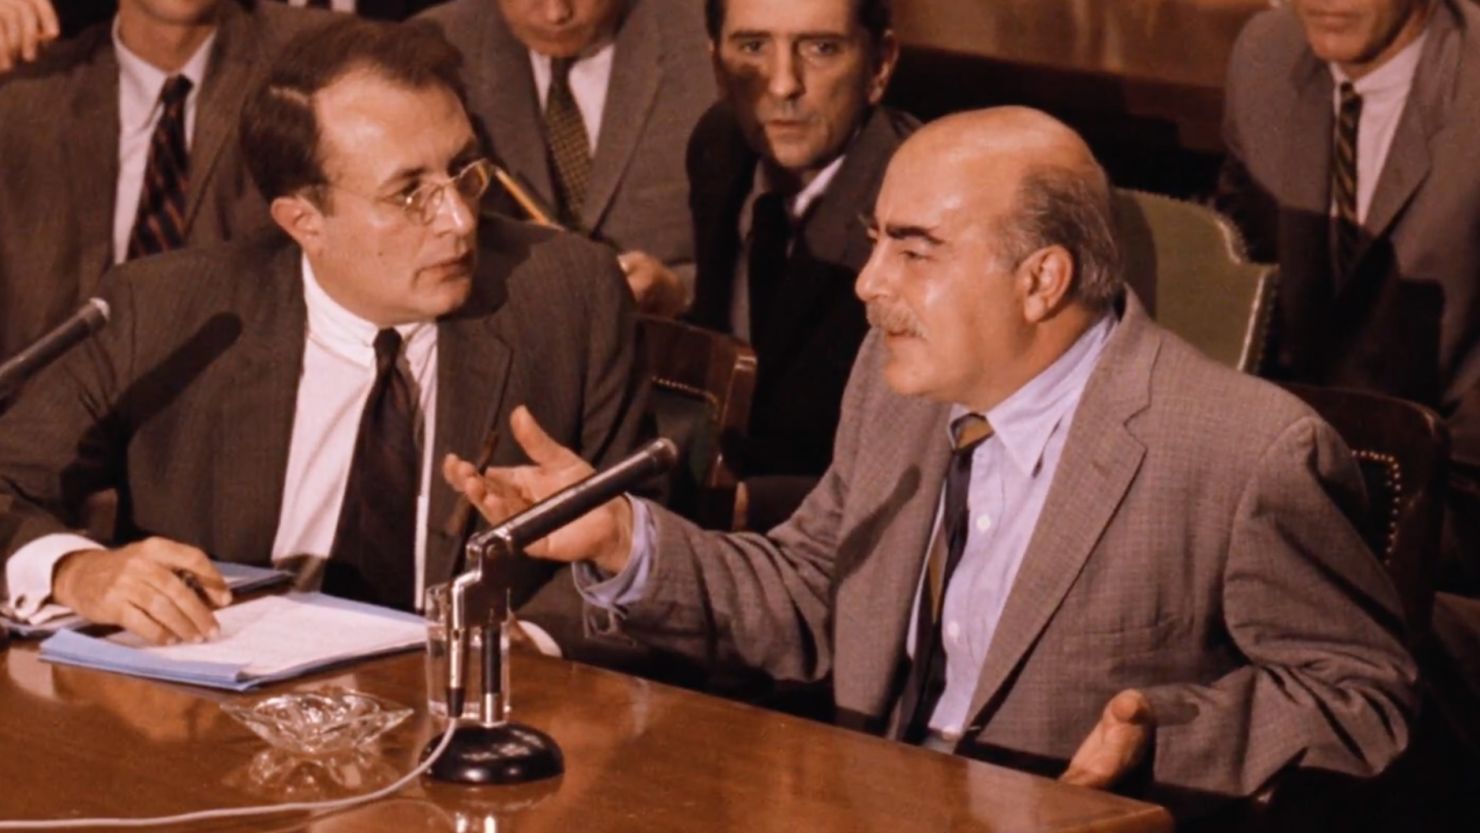 In a scene from the movie,"The Godfather: Part II," mafia figure Frank Pentangeli lies to a Senate committee investigating organized crime.